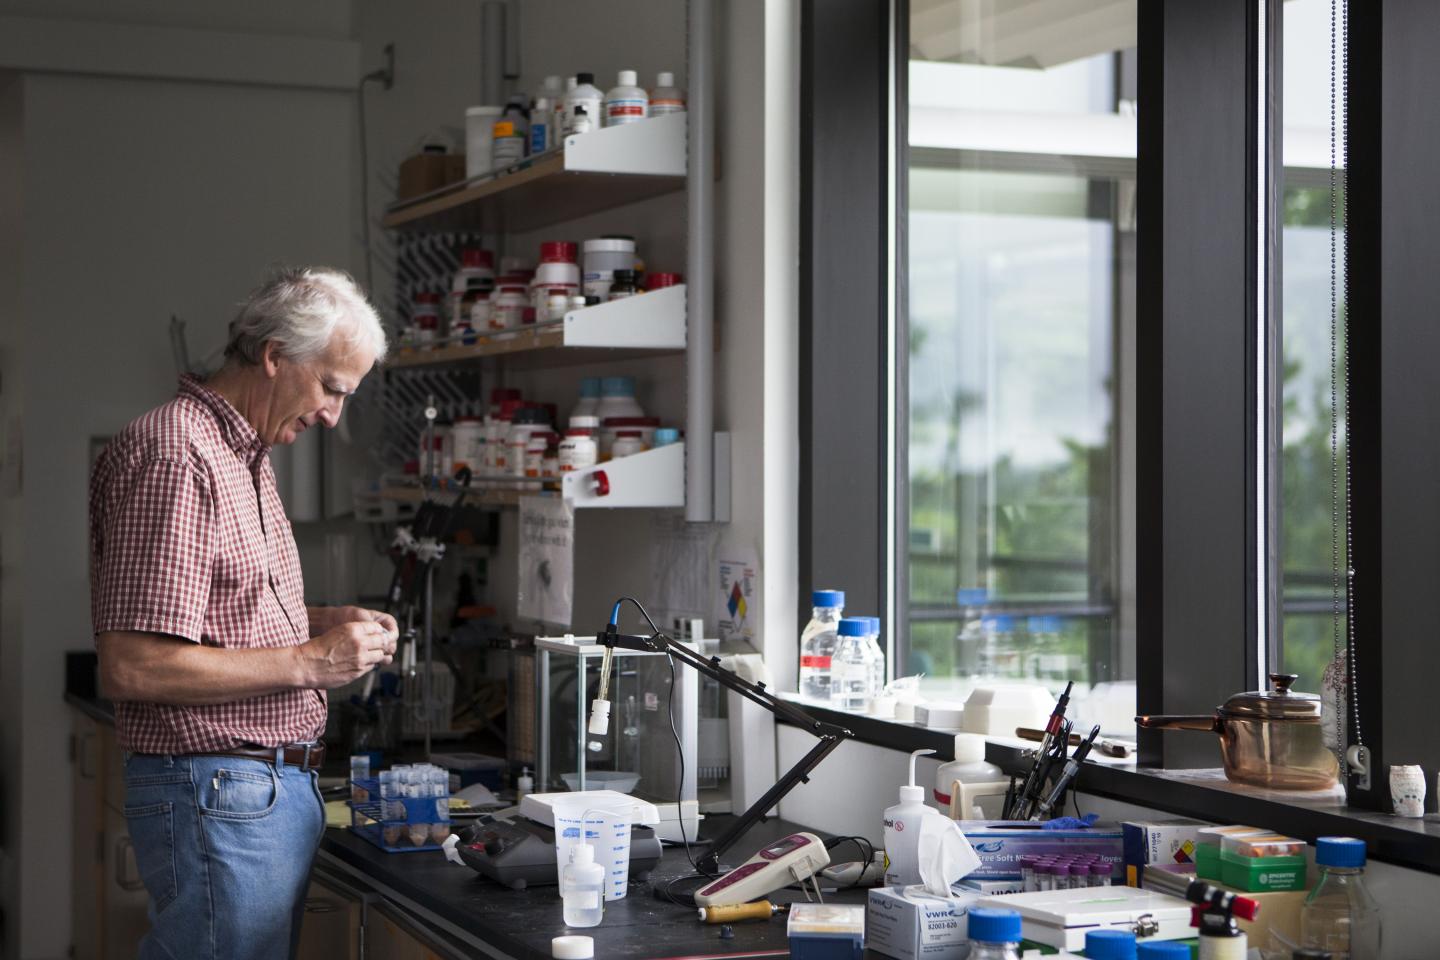 Senior Research Scientist David Emerson works in his laboratory at Bigelow Laboratory for Ocean Sciences.